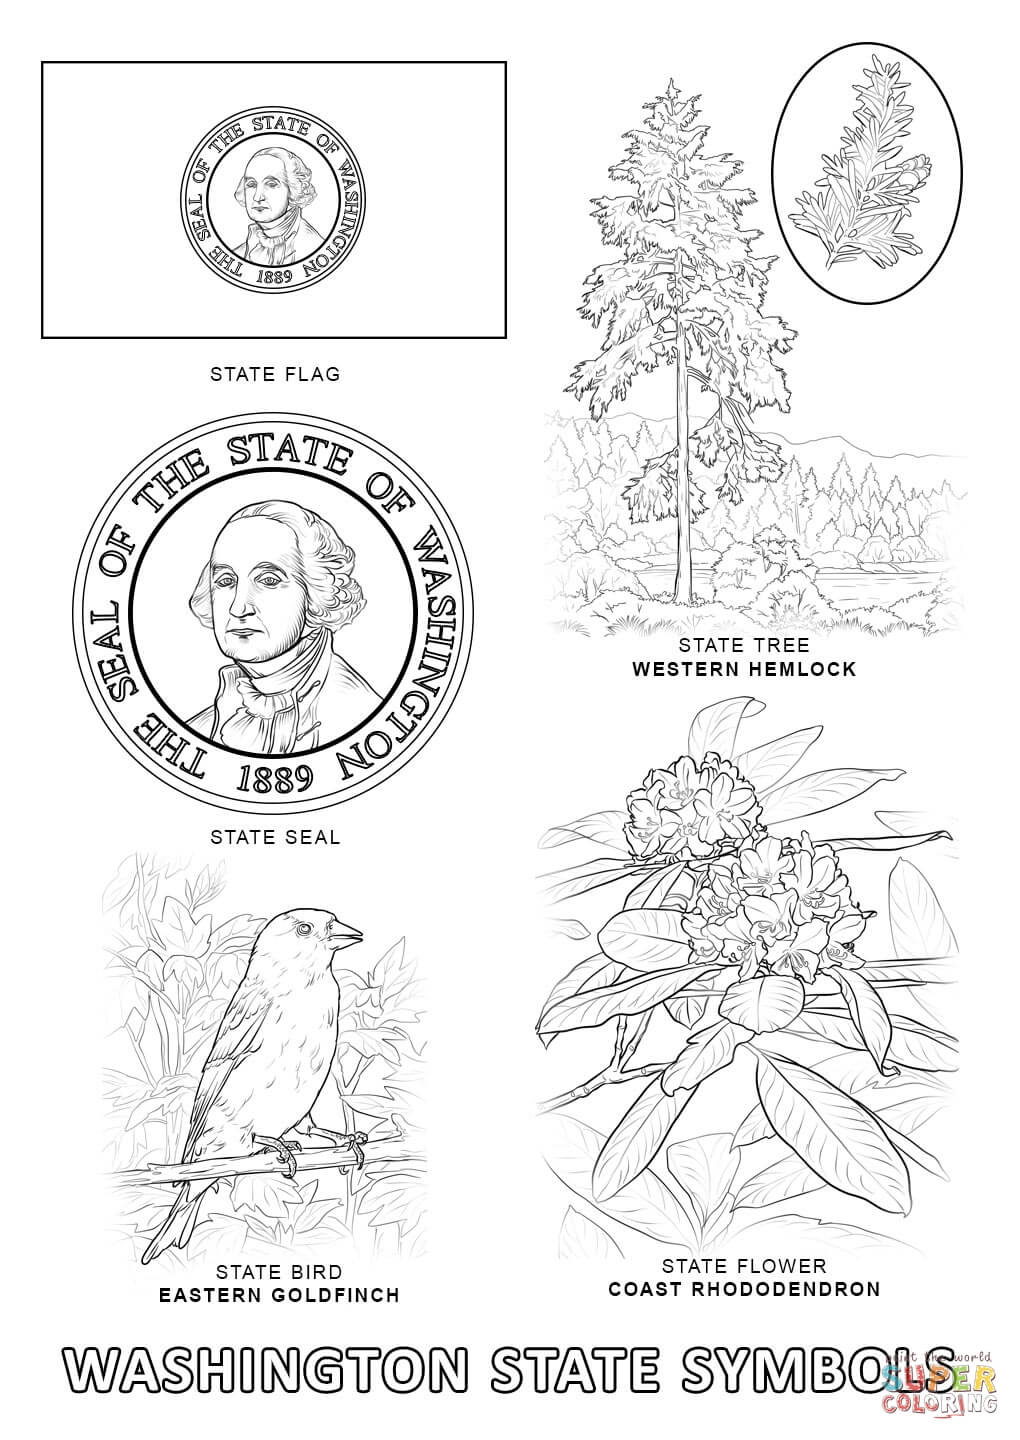 Washington State Coloring Page - Coloring Home